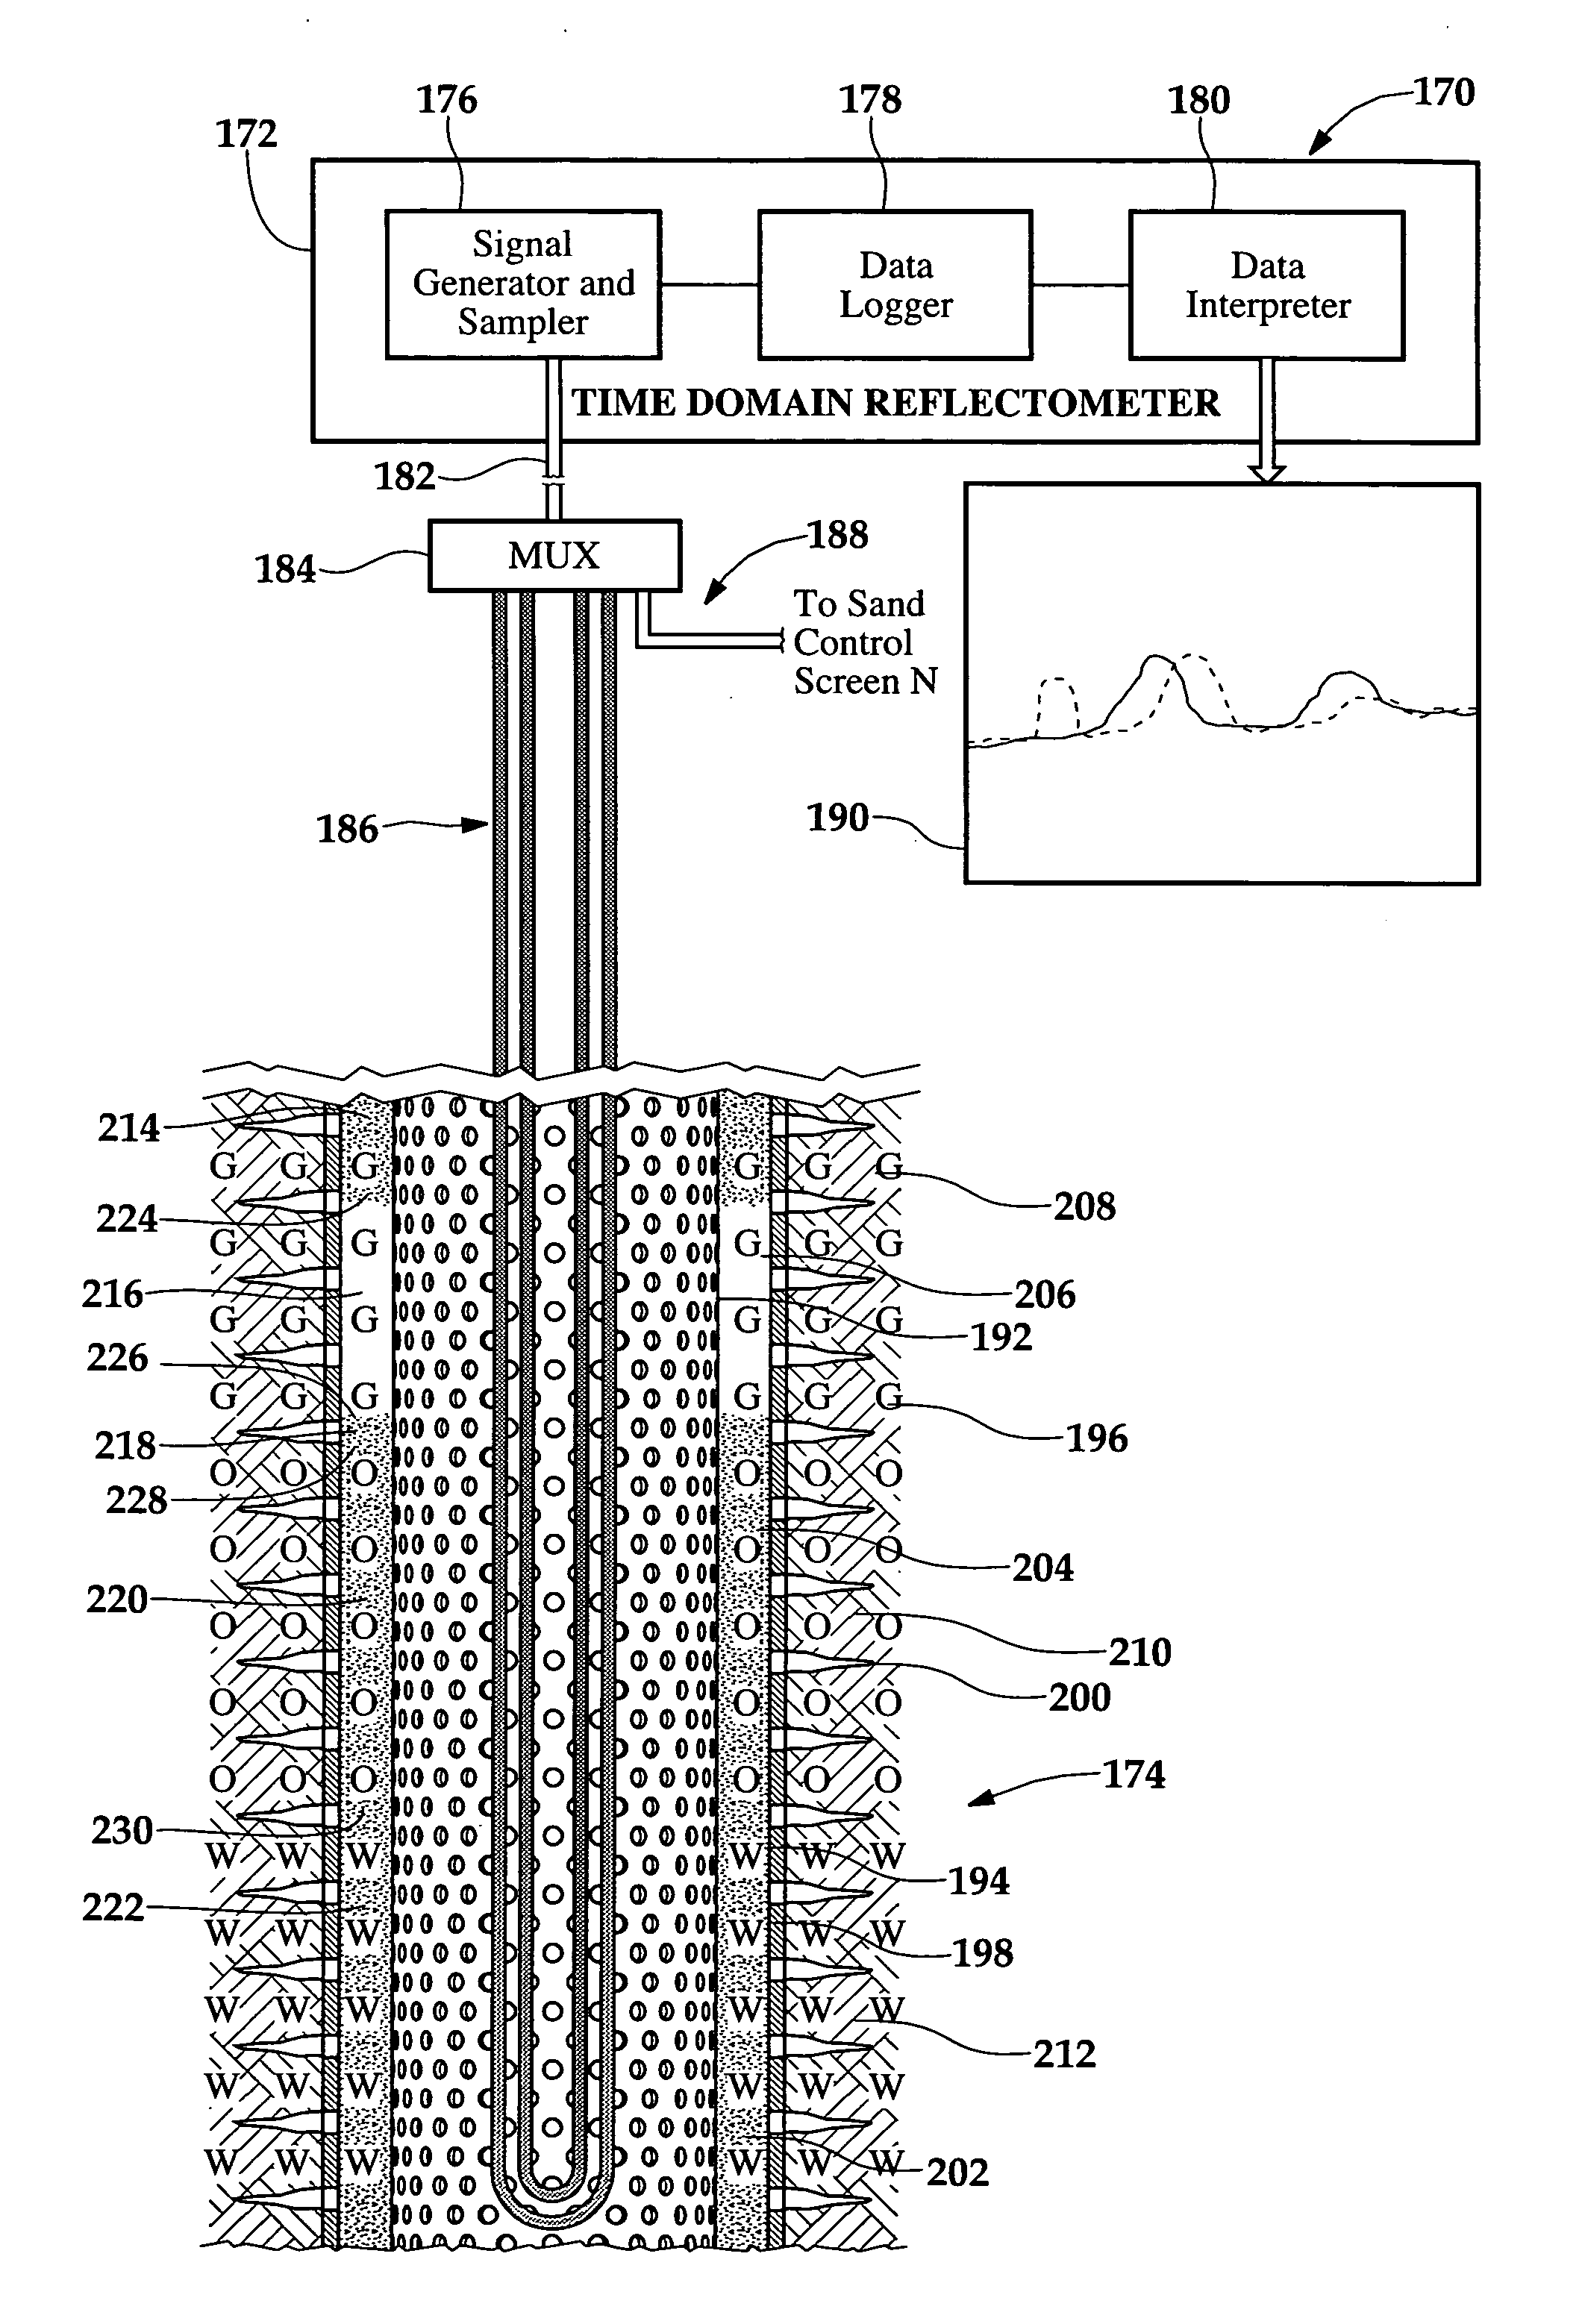 System and method for determining downhole conditions